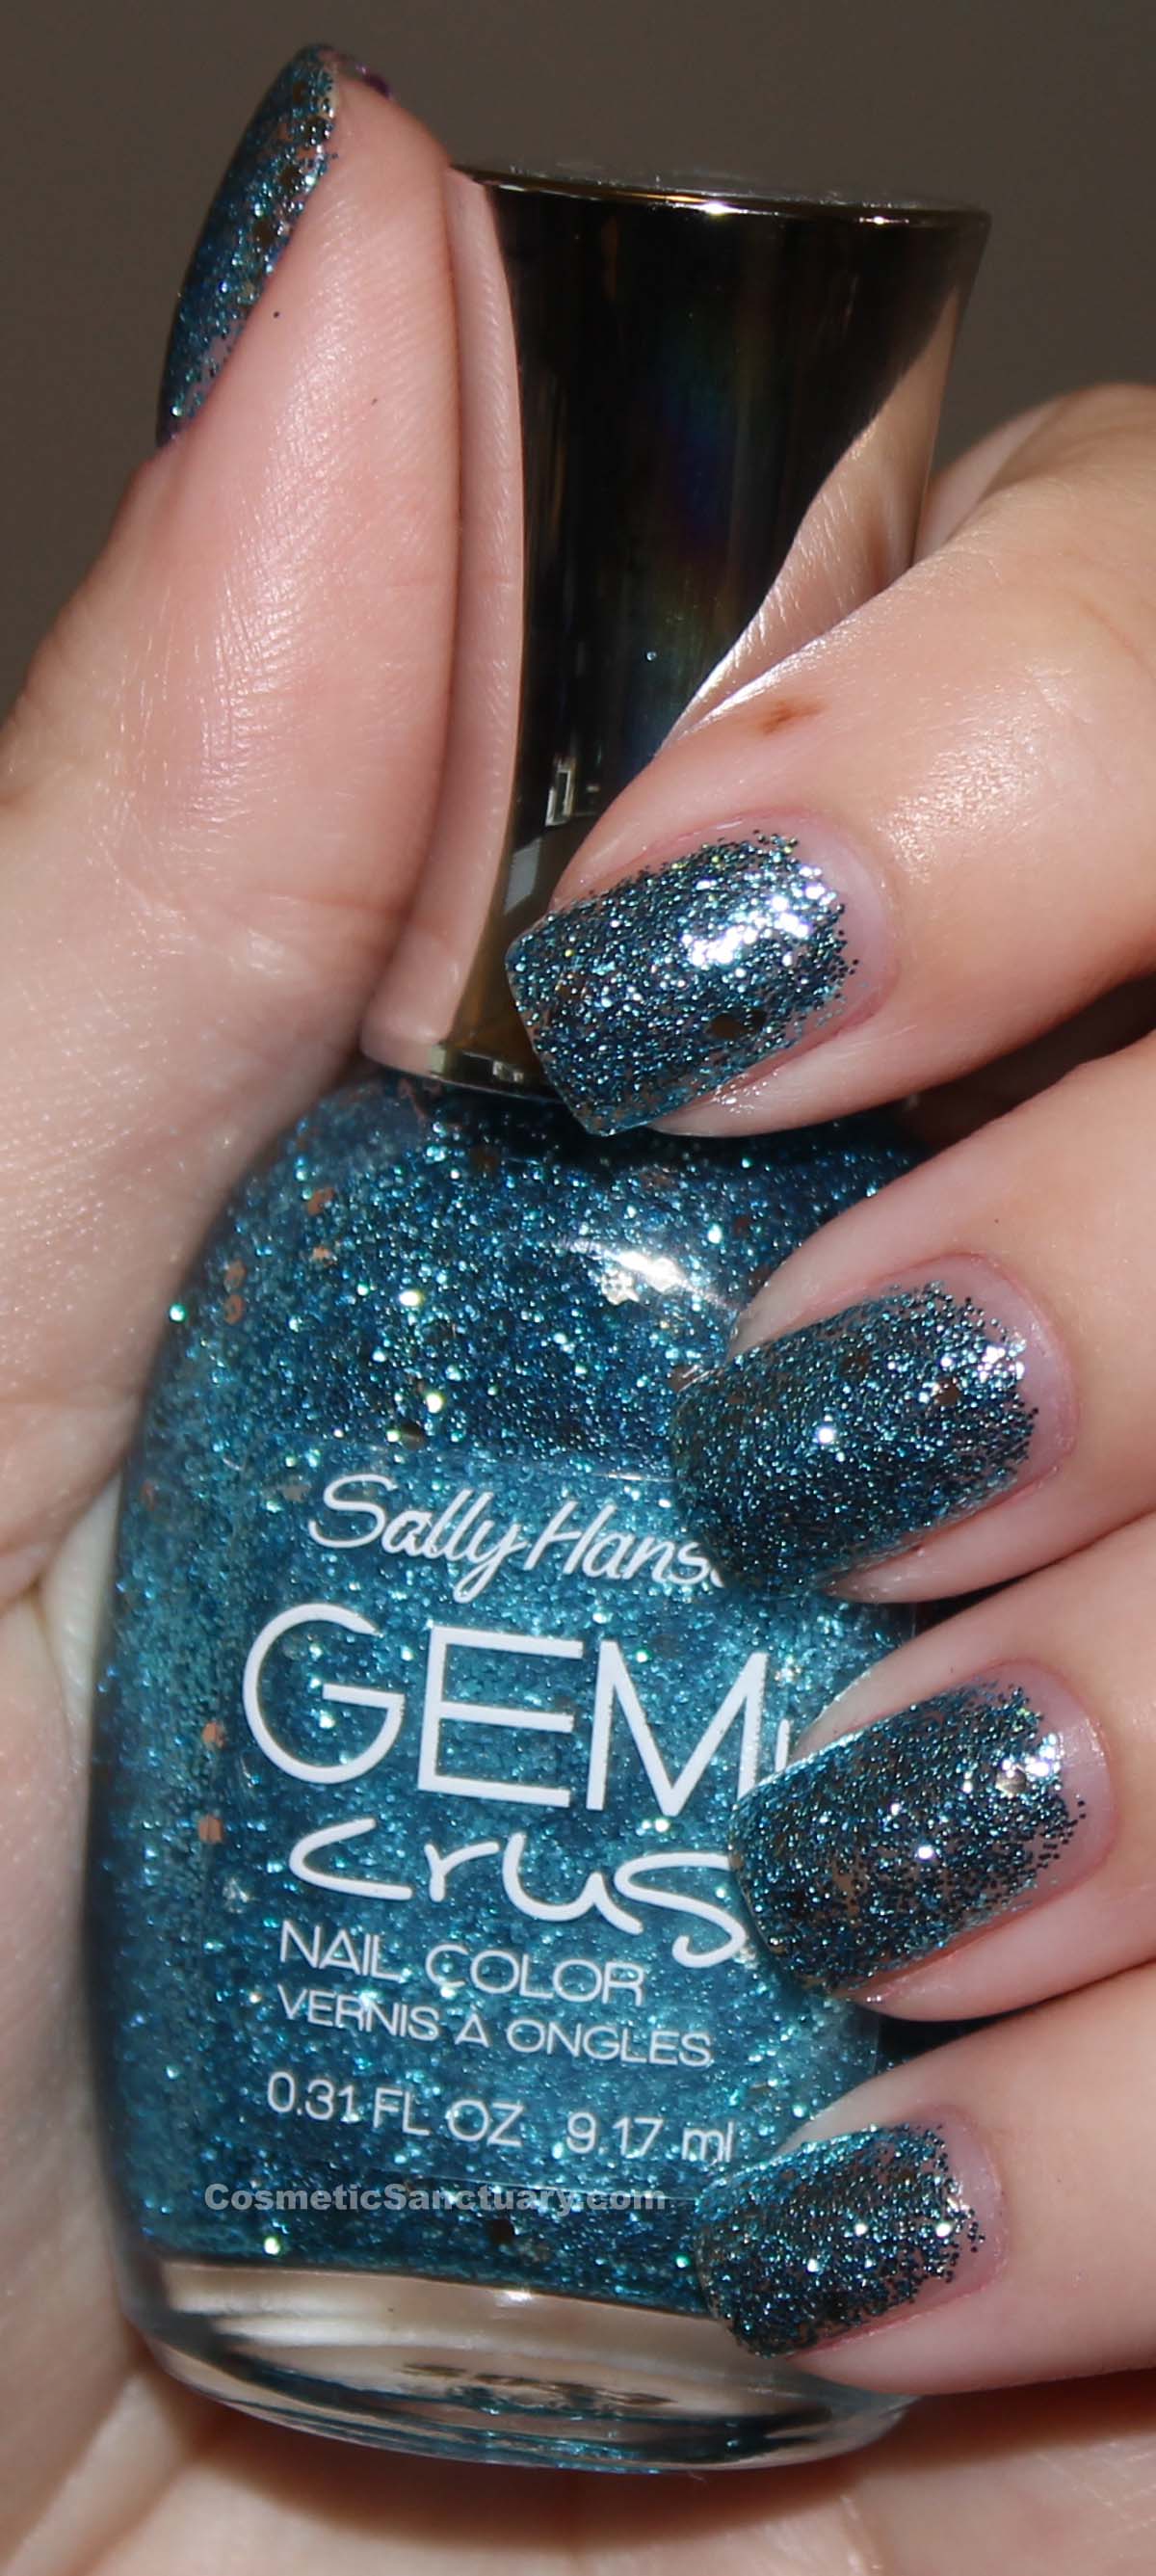 Sally Hansen Gem Crush Collection Swatches and Review